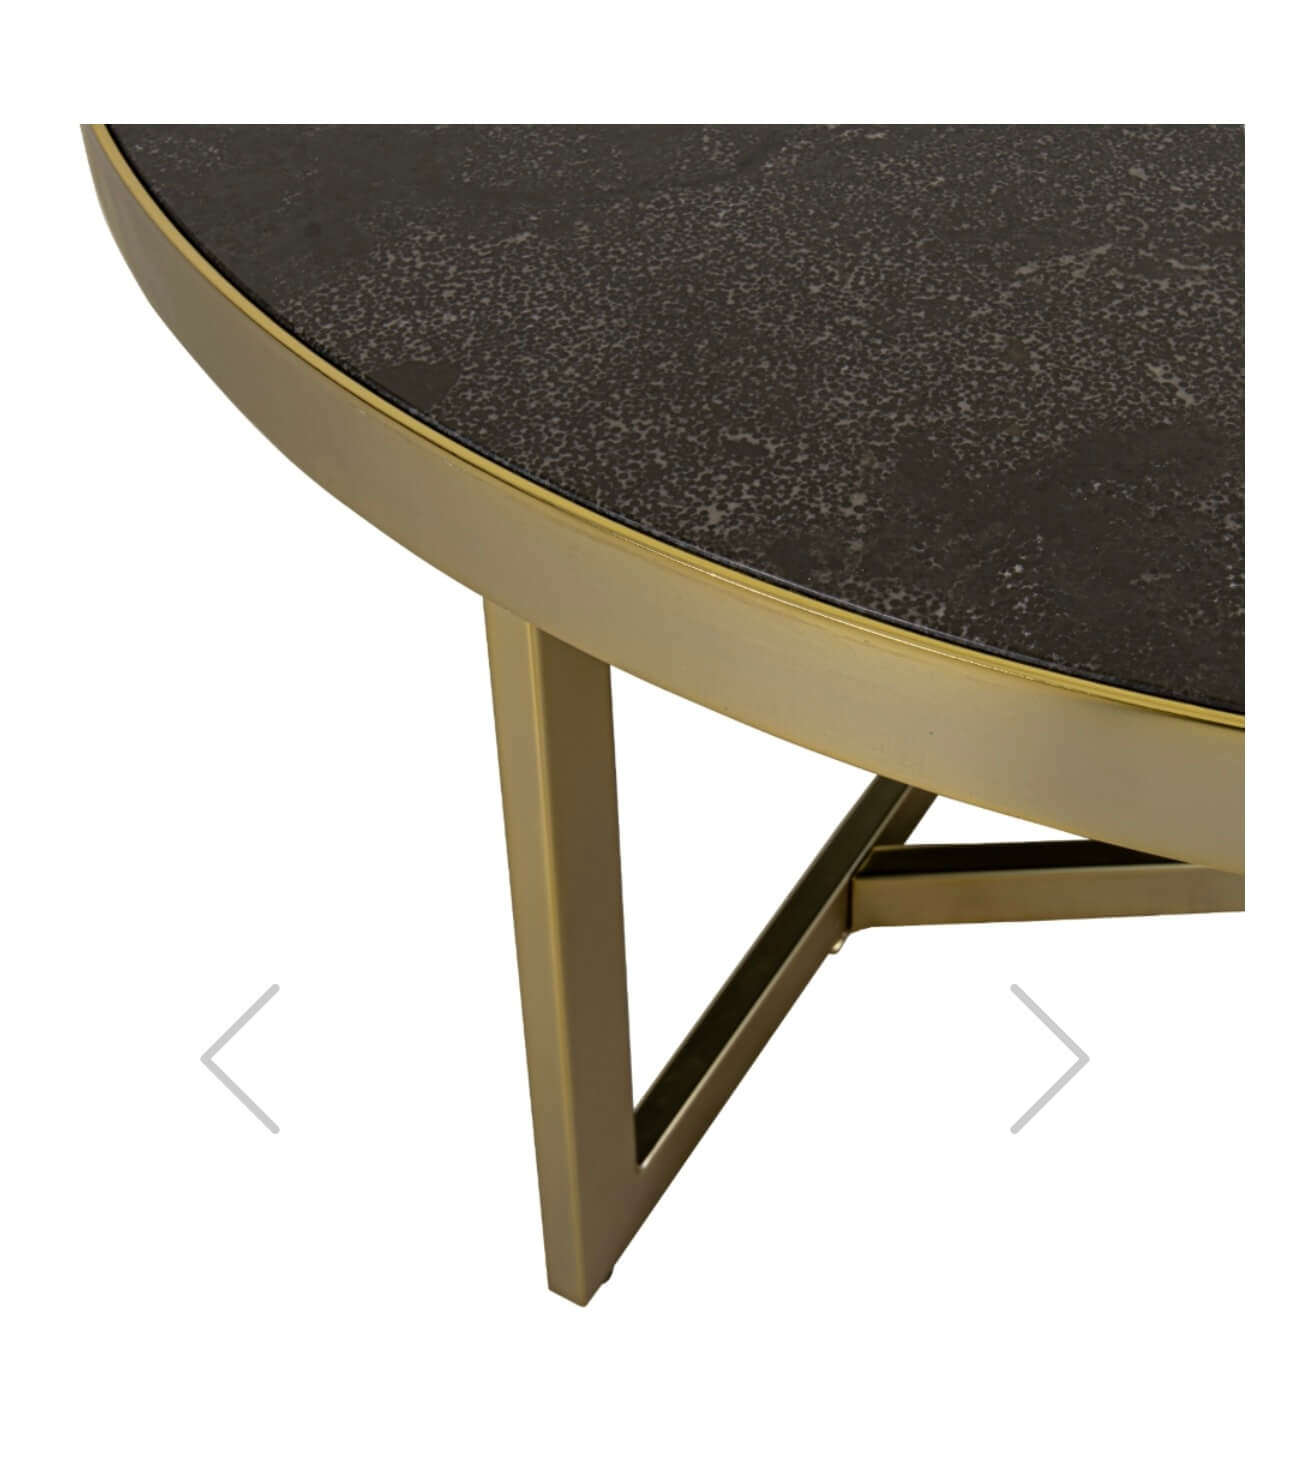 Champagne Marble Side Table